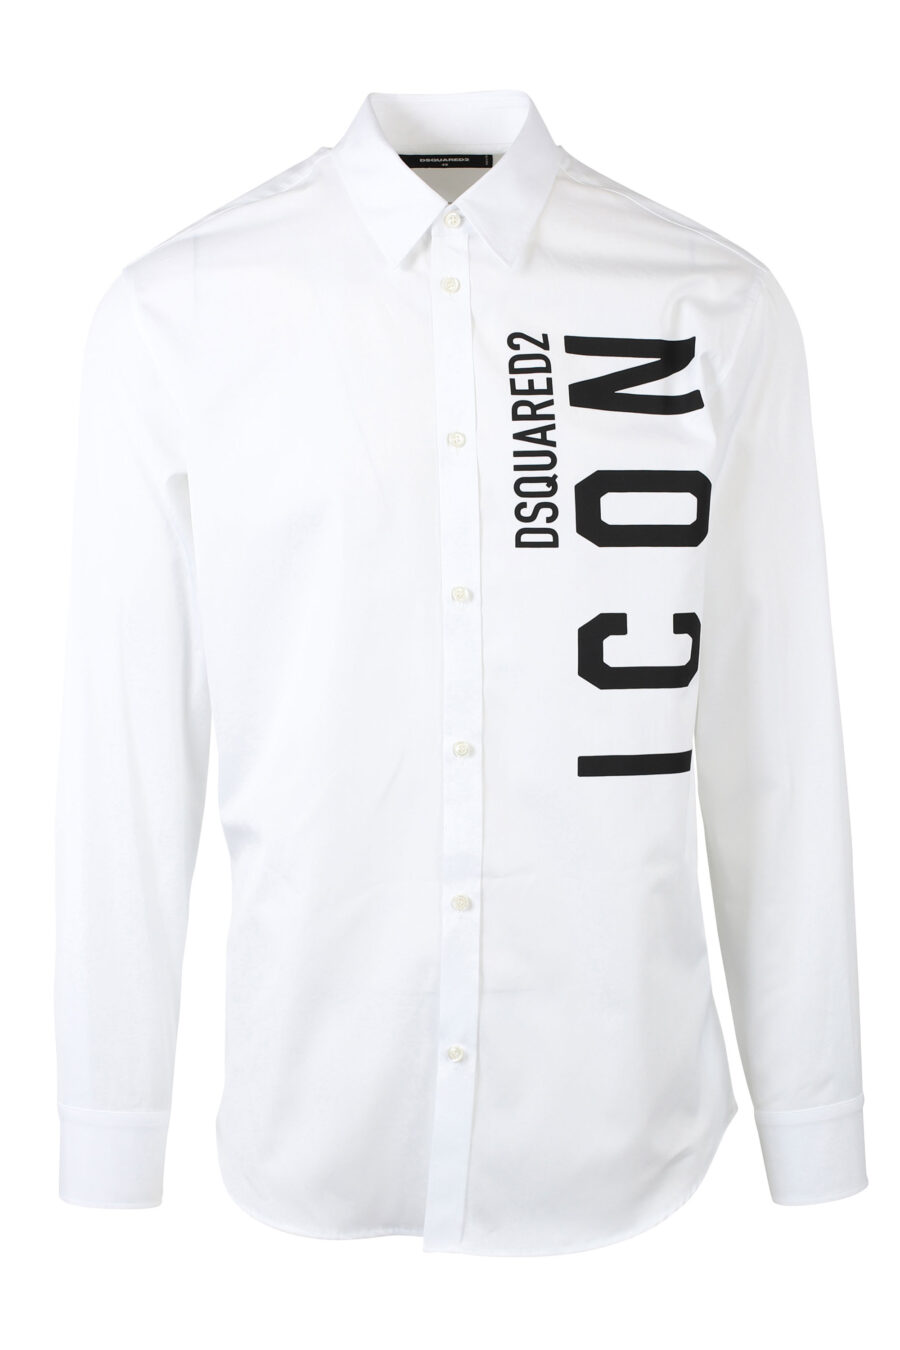 Chemise blanche avec double logo vertical "icon" - IMG 0784